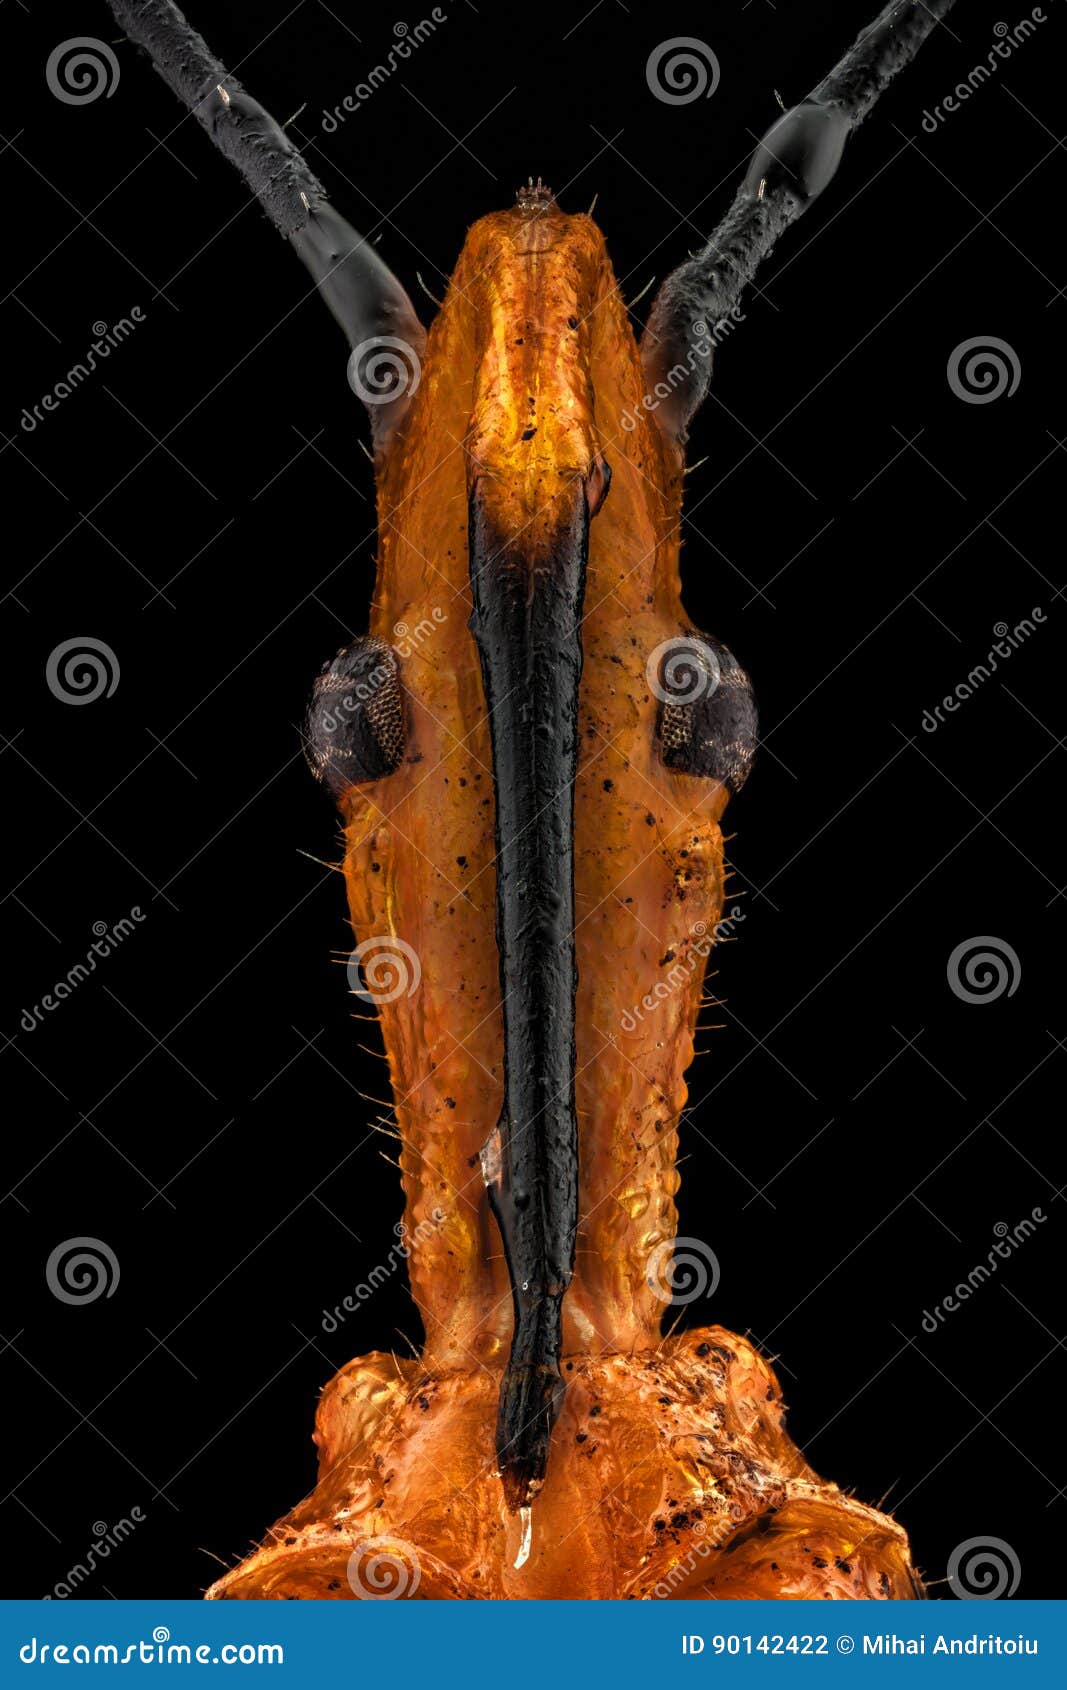 https://thumbs.dreamstime.com/z/portrait-milkweed-assassin-bug-extreme-macro-zelus-annulosus-considered-its-potential-as-90142422.jpg